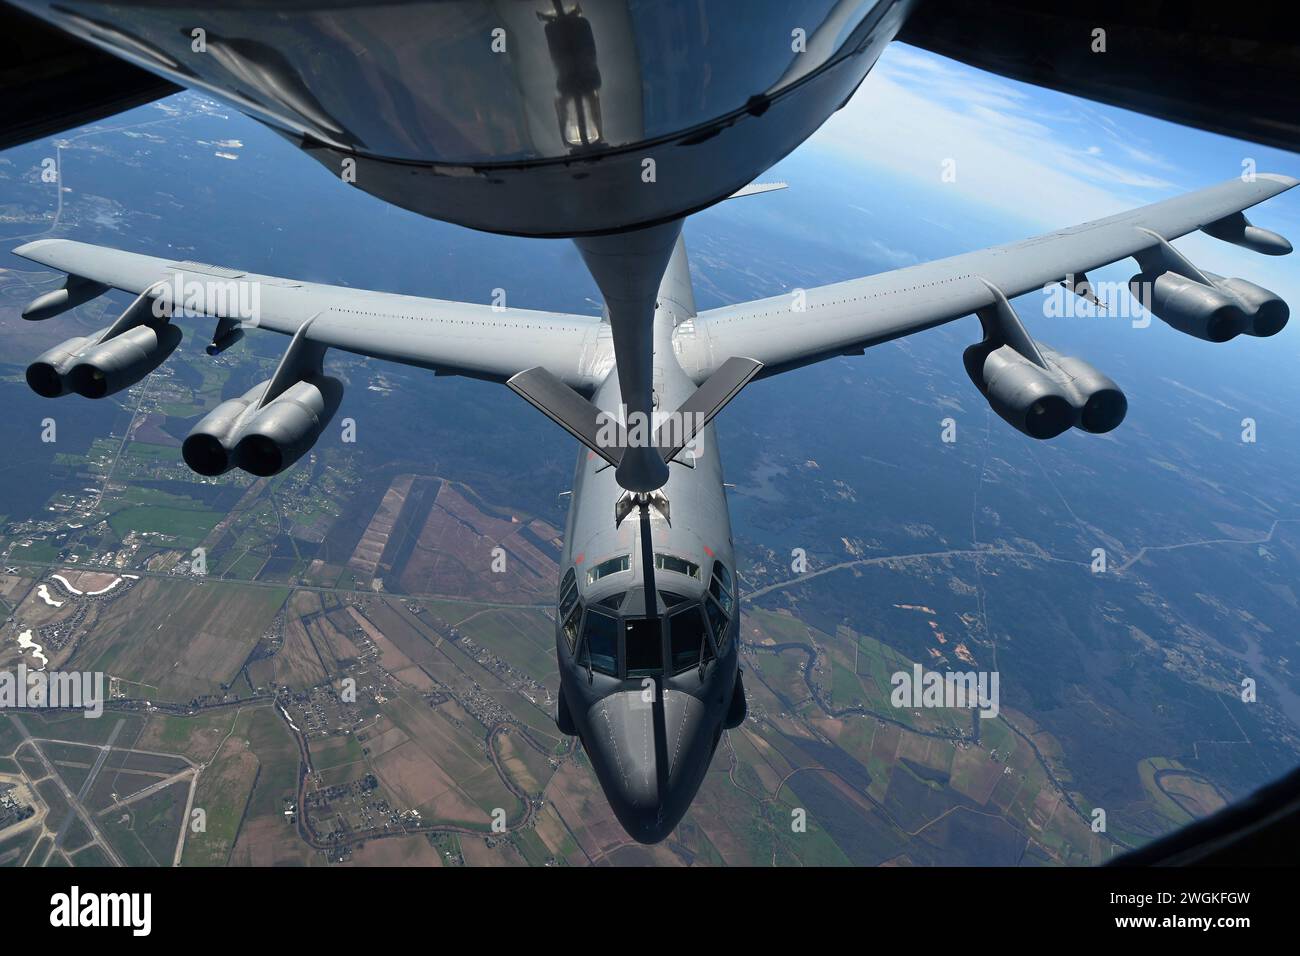 , United States. 30 January, 2024. A U.S. Air Force B-52 Stratofortress strategic bomber aircraft from the 11th Bomb Squadron, refuels from a KC-135 Stratotanker aircraft after refueling, January 30, 2024 over the Southern United States. Credit: SrA Jessica Do/US Air Force/Alamy Live News Stock Photo